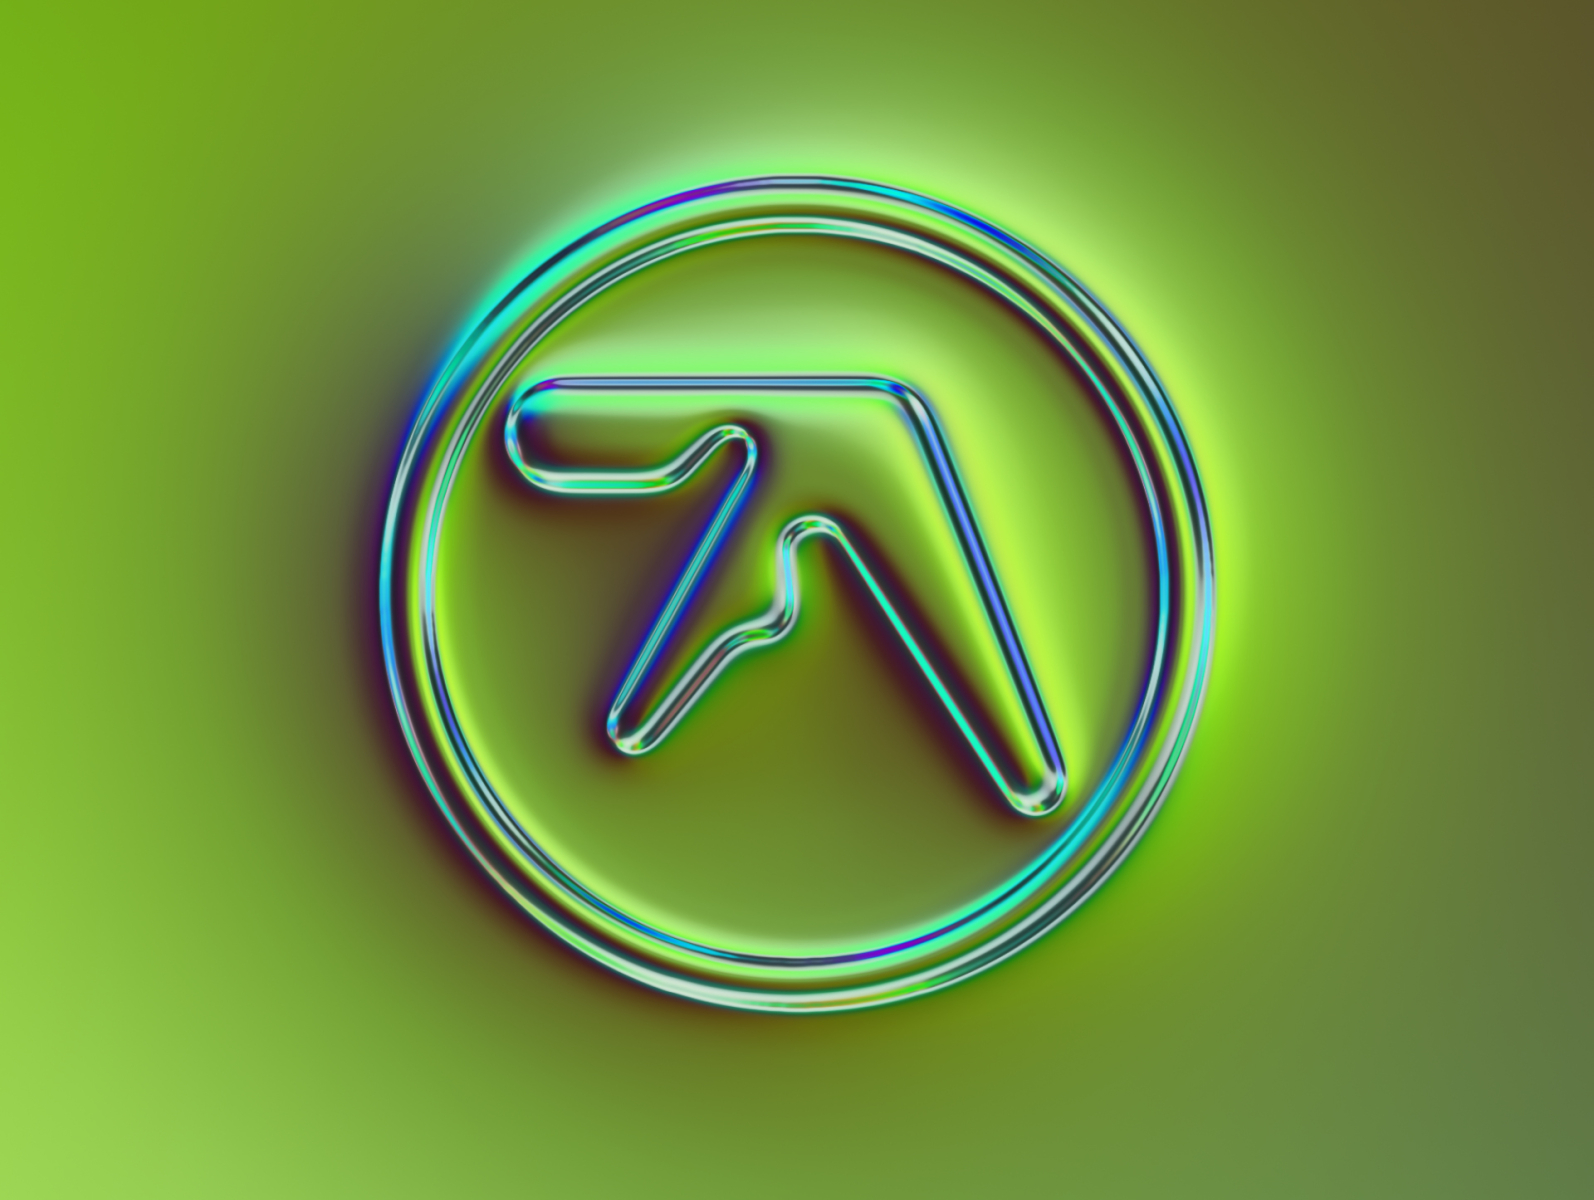 Aphex Twin  Syro album art  Fonts In Use